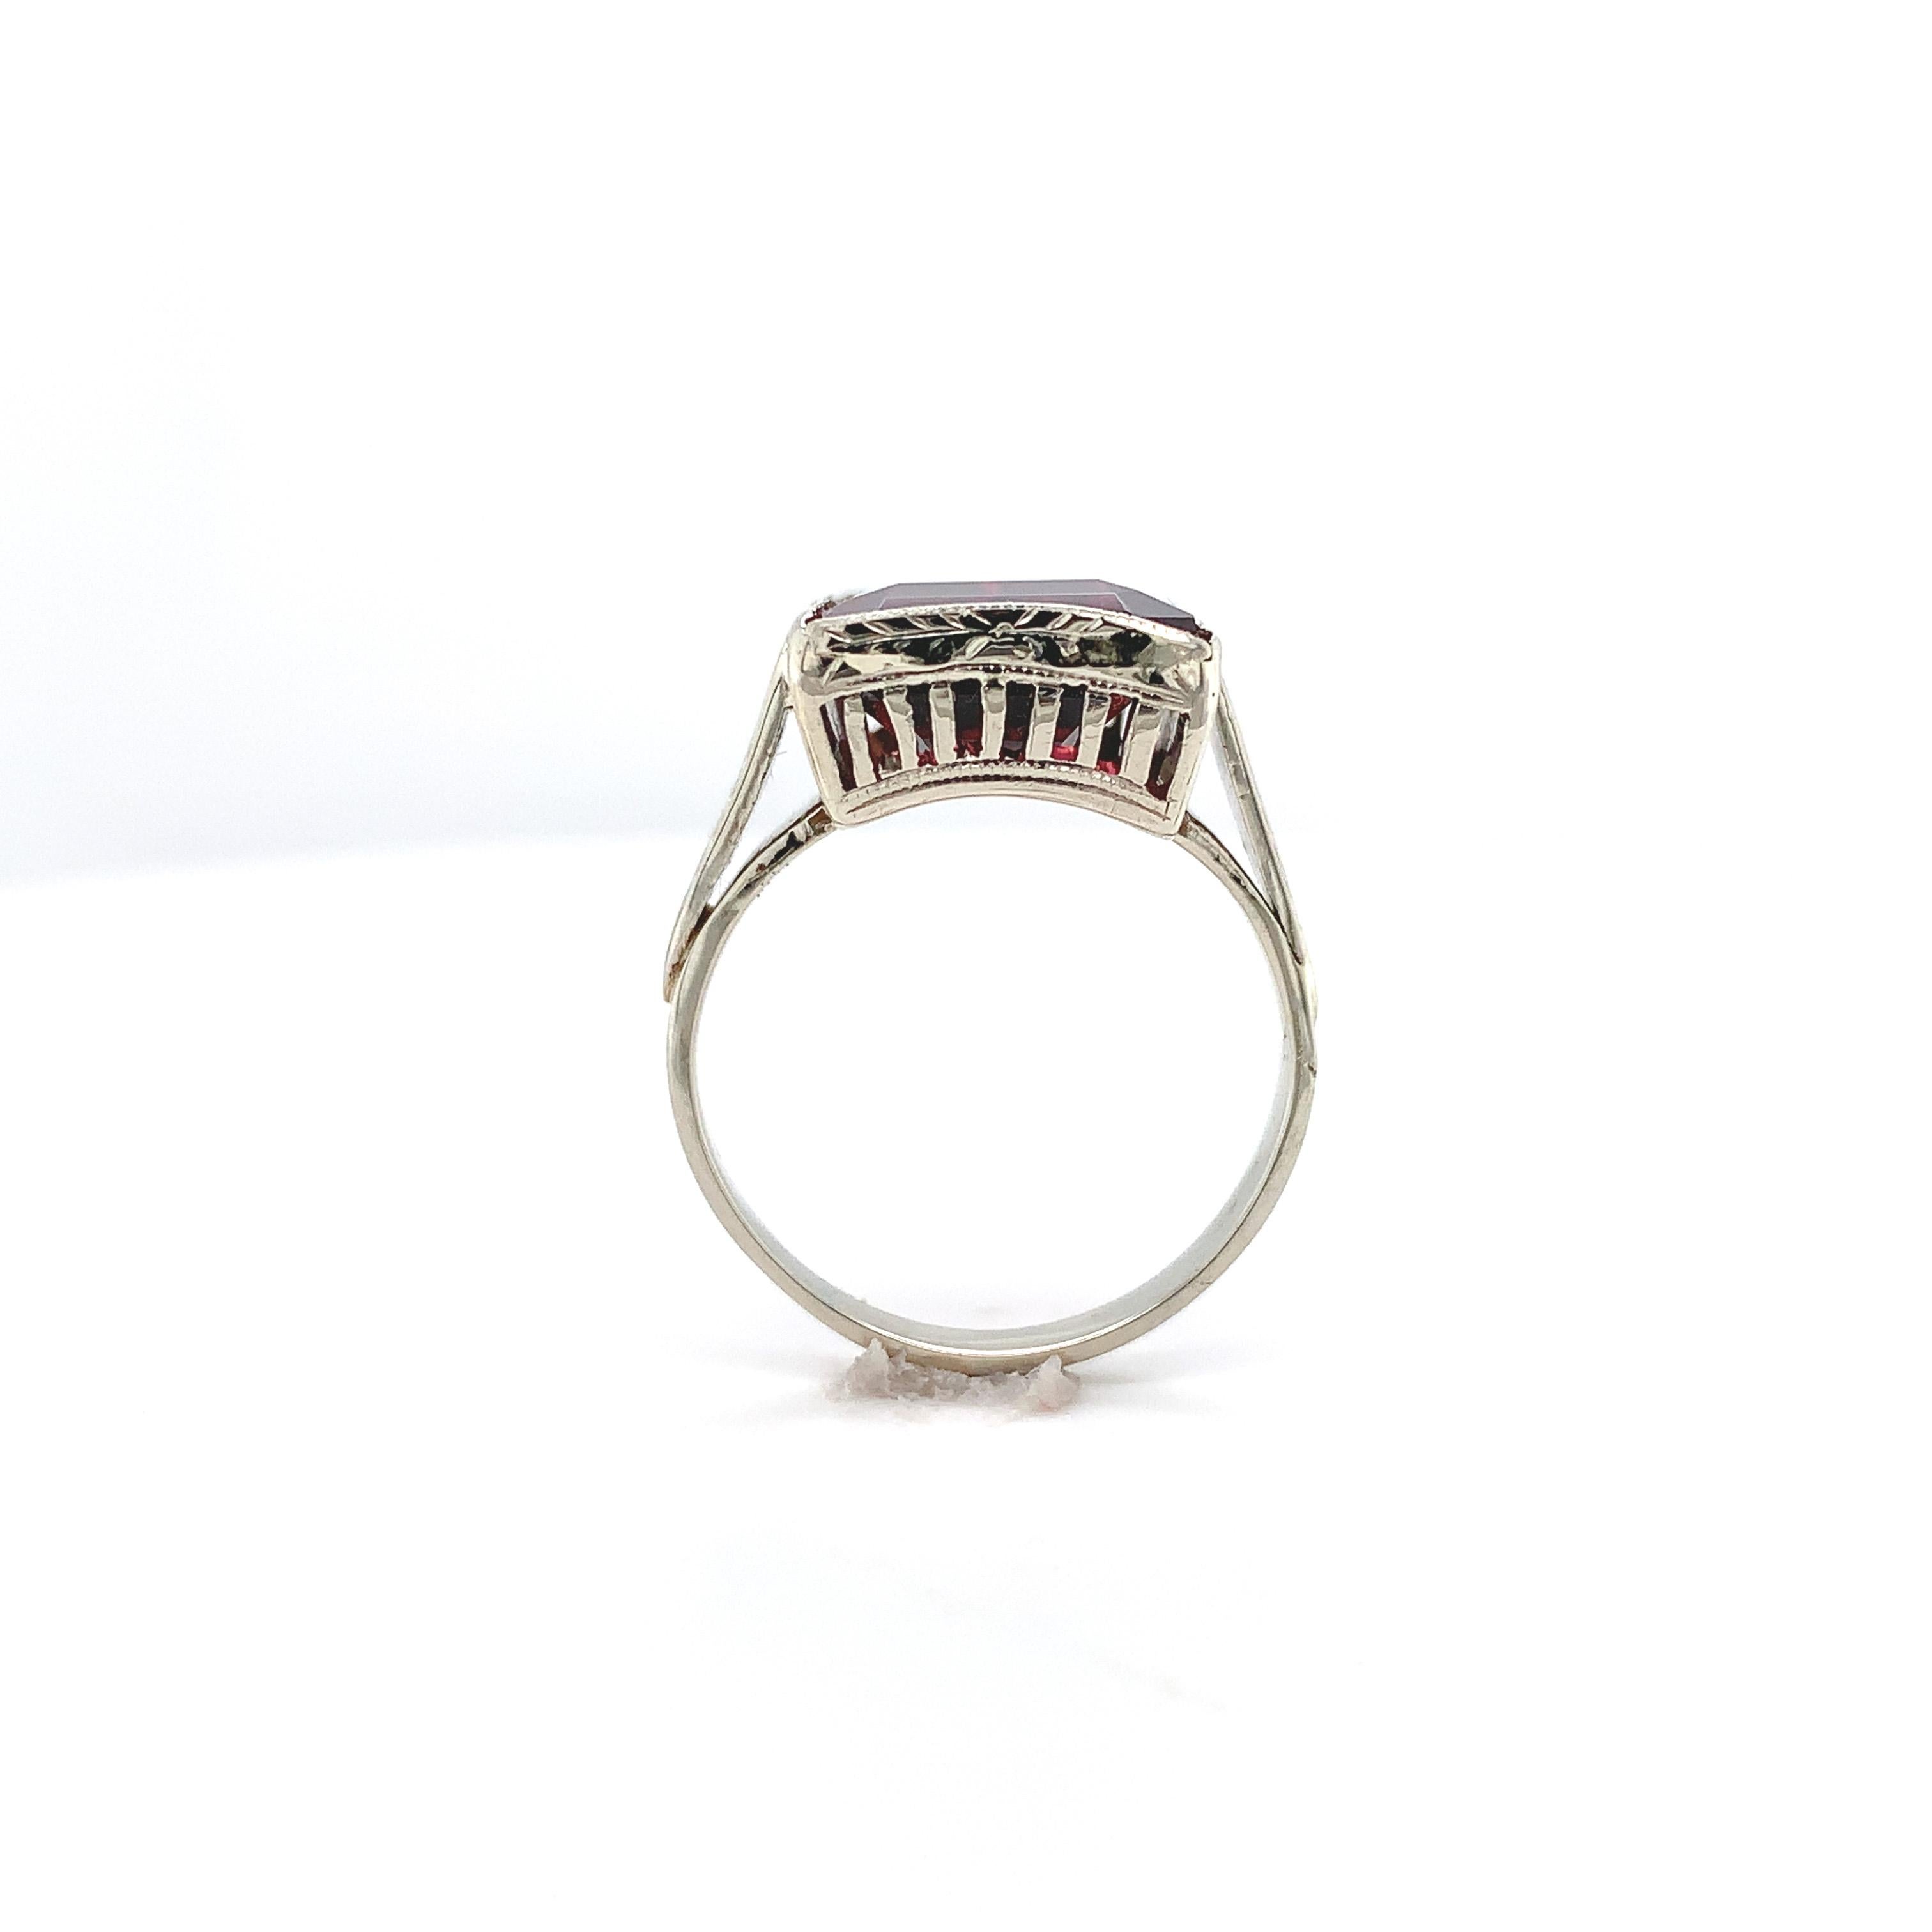 Vintage 14K white gold ring featuring an emerald cut rhodolite garnet. This deep raspberry dark pinkish-red color garnet weighs 8.35 carats and measures about 14mm x 10mm. The mounting is all hand engraved. The ring originally accommodated a square